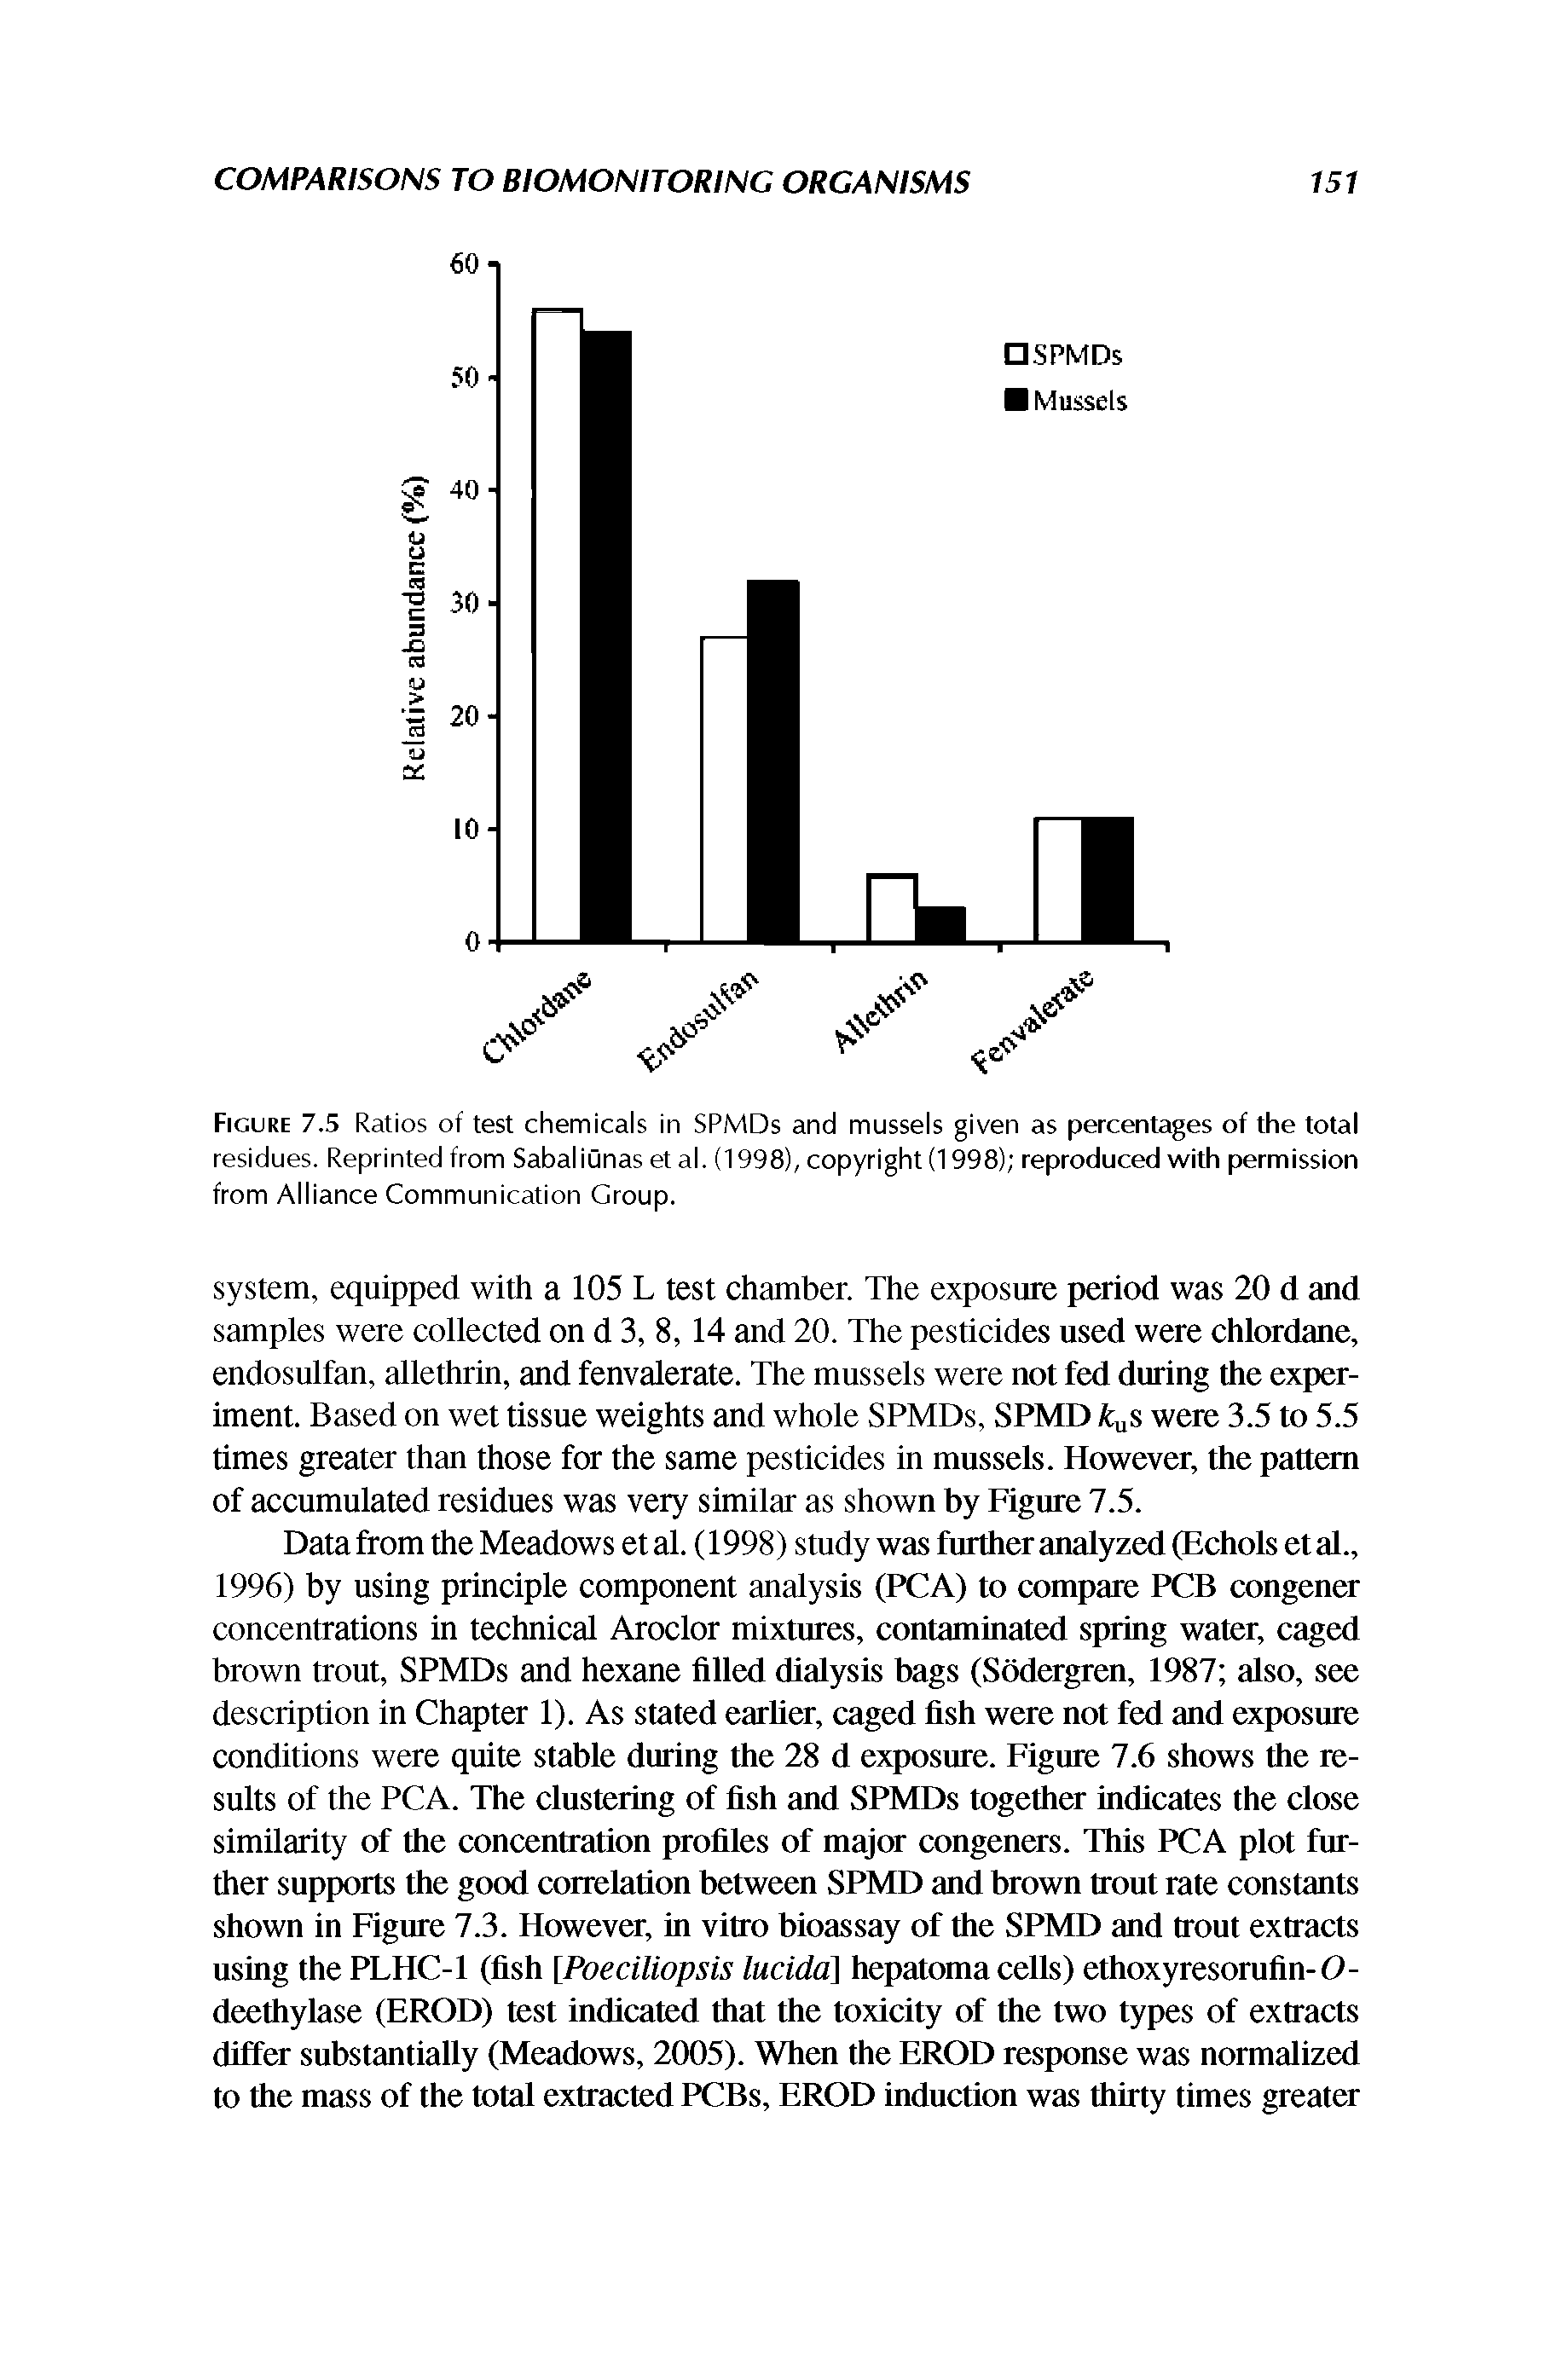 Figure 7.5 Ratios of test chemicals in SPMDs and mussels given as percentages of the total residues. Reprinted from Sabaliunas et al. (1998), copyright (1998) reproduced with permission from Alliance Communication Group.